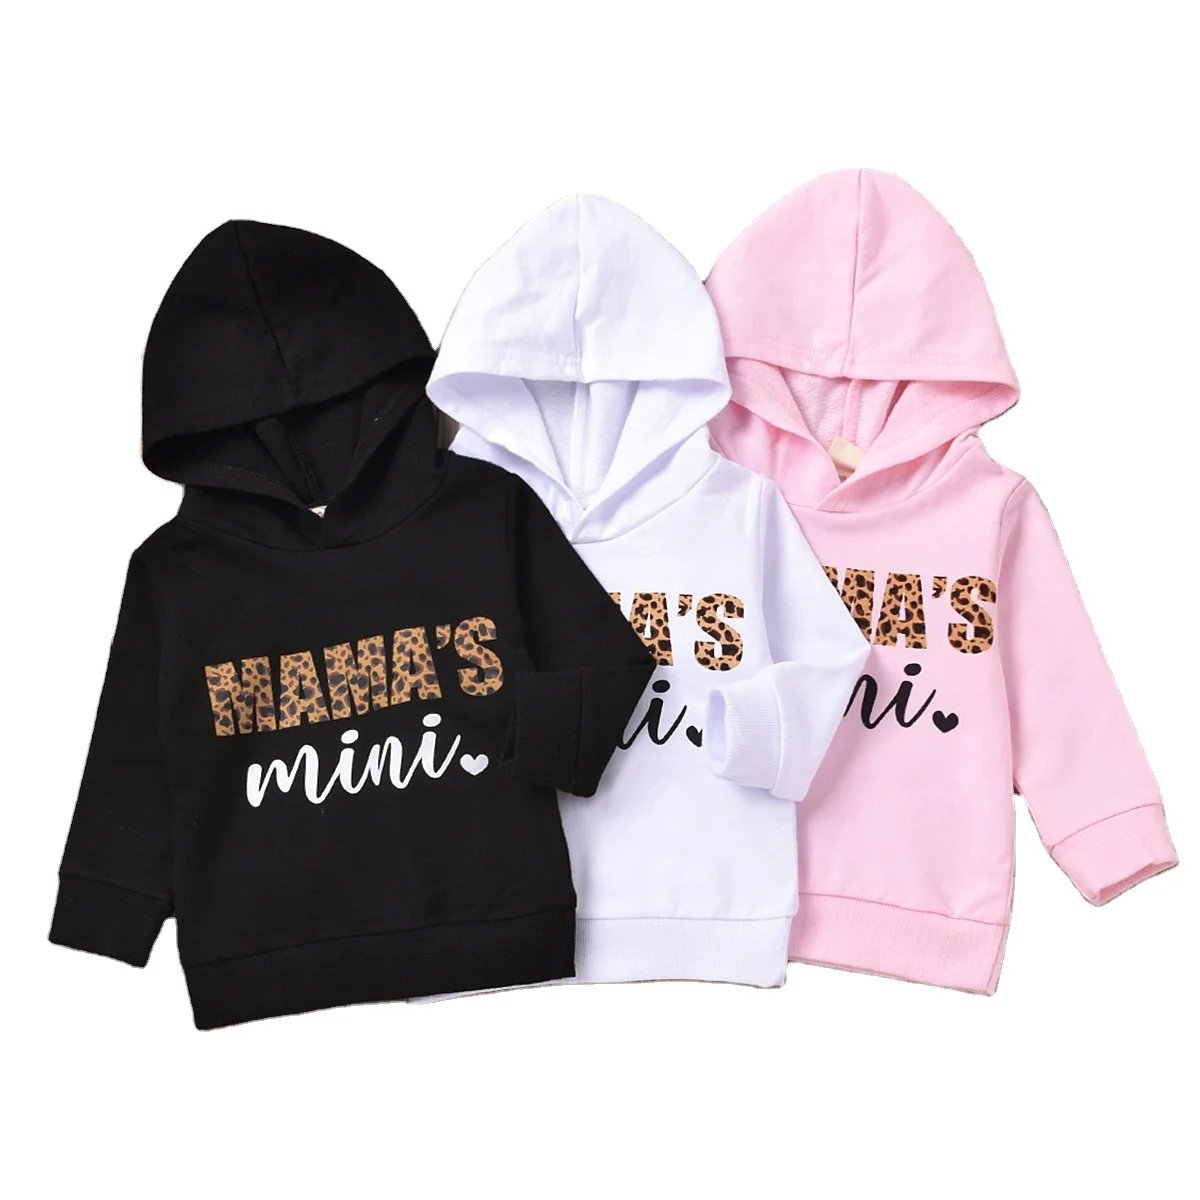 Infant Toddler Baby Girls Hoodies Outfits Mamas Mini Letter Sweatshirts Casual Hooded Shirts Pullover Sweater Top